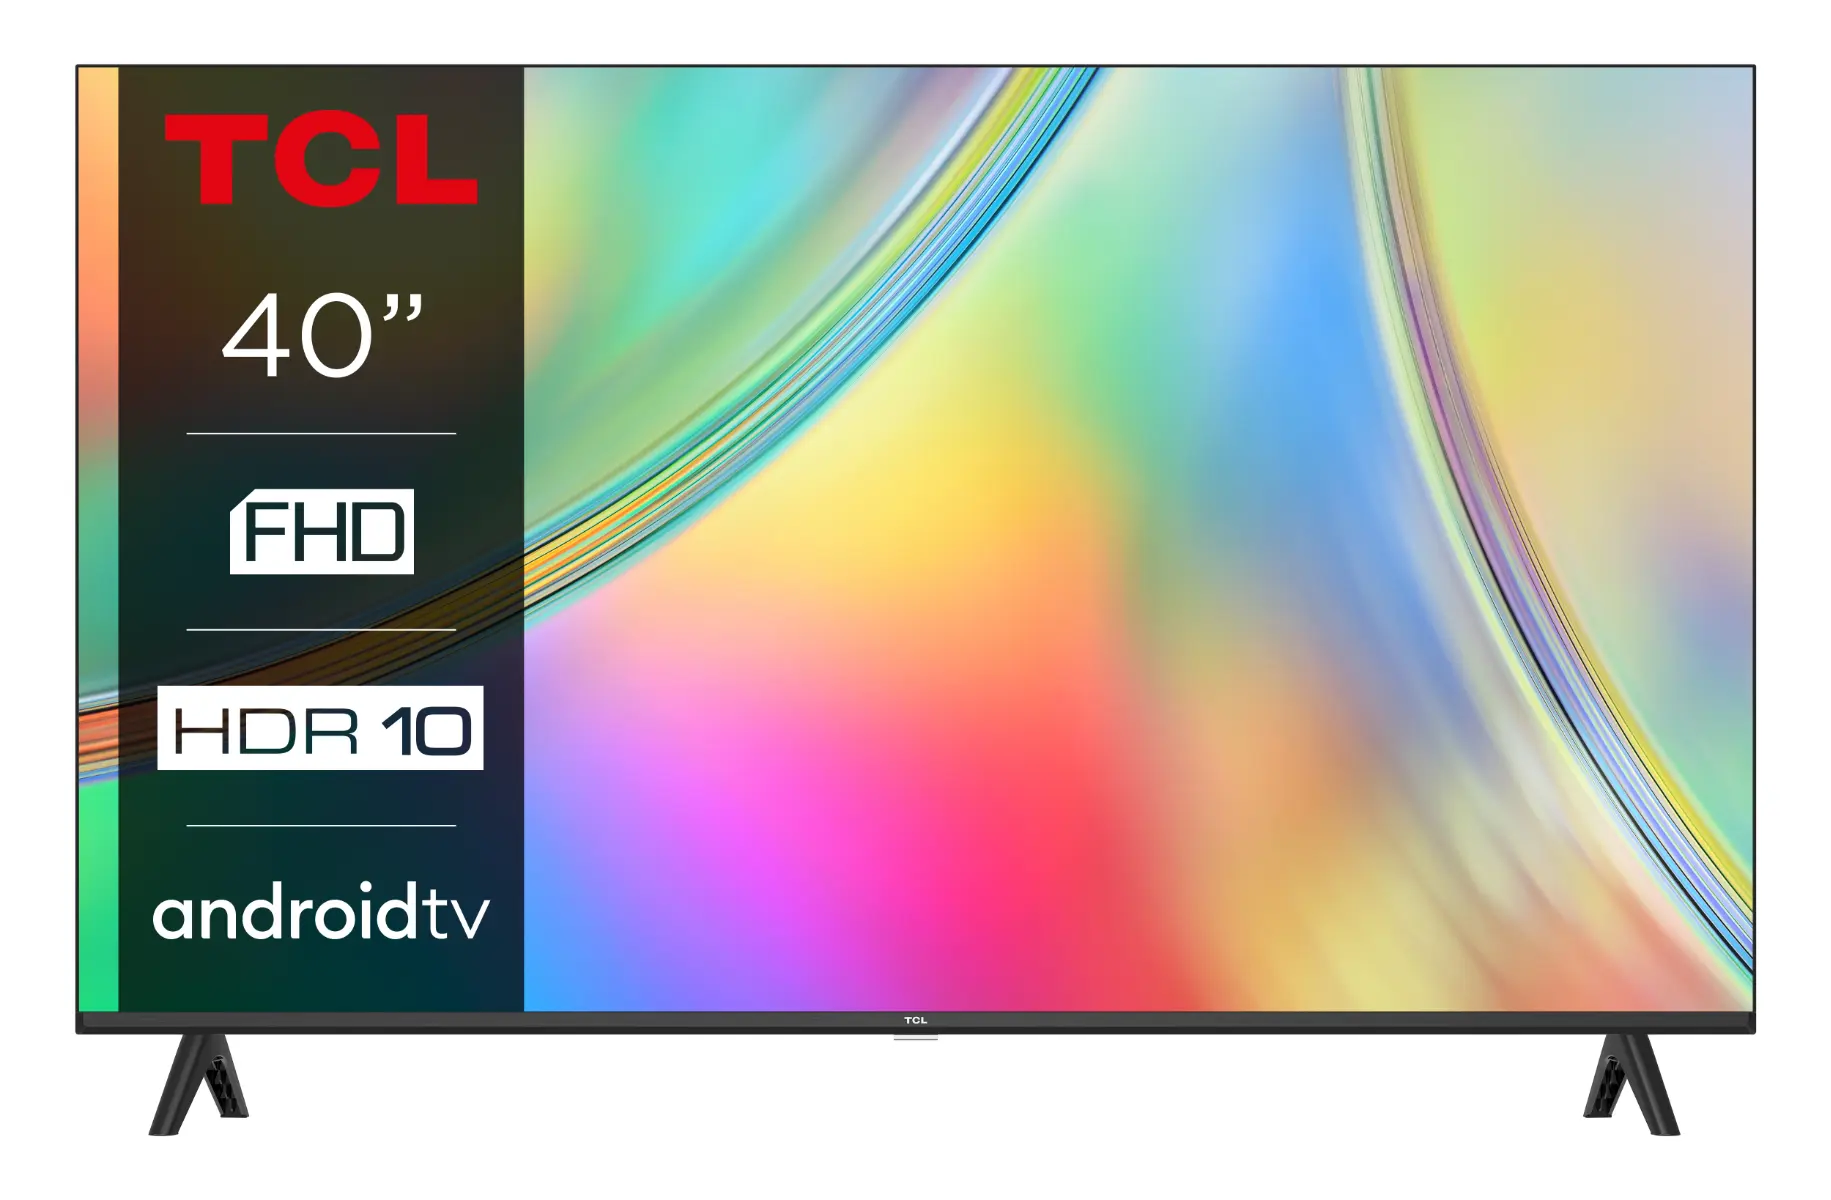 Televizor Smart Android TCL 40S5400A, 101 cm, 40 inch, Full HD, Negru